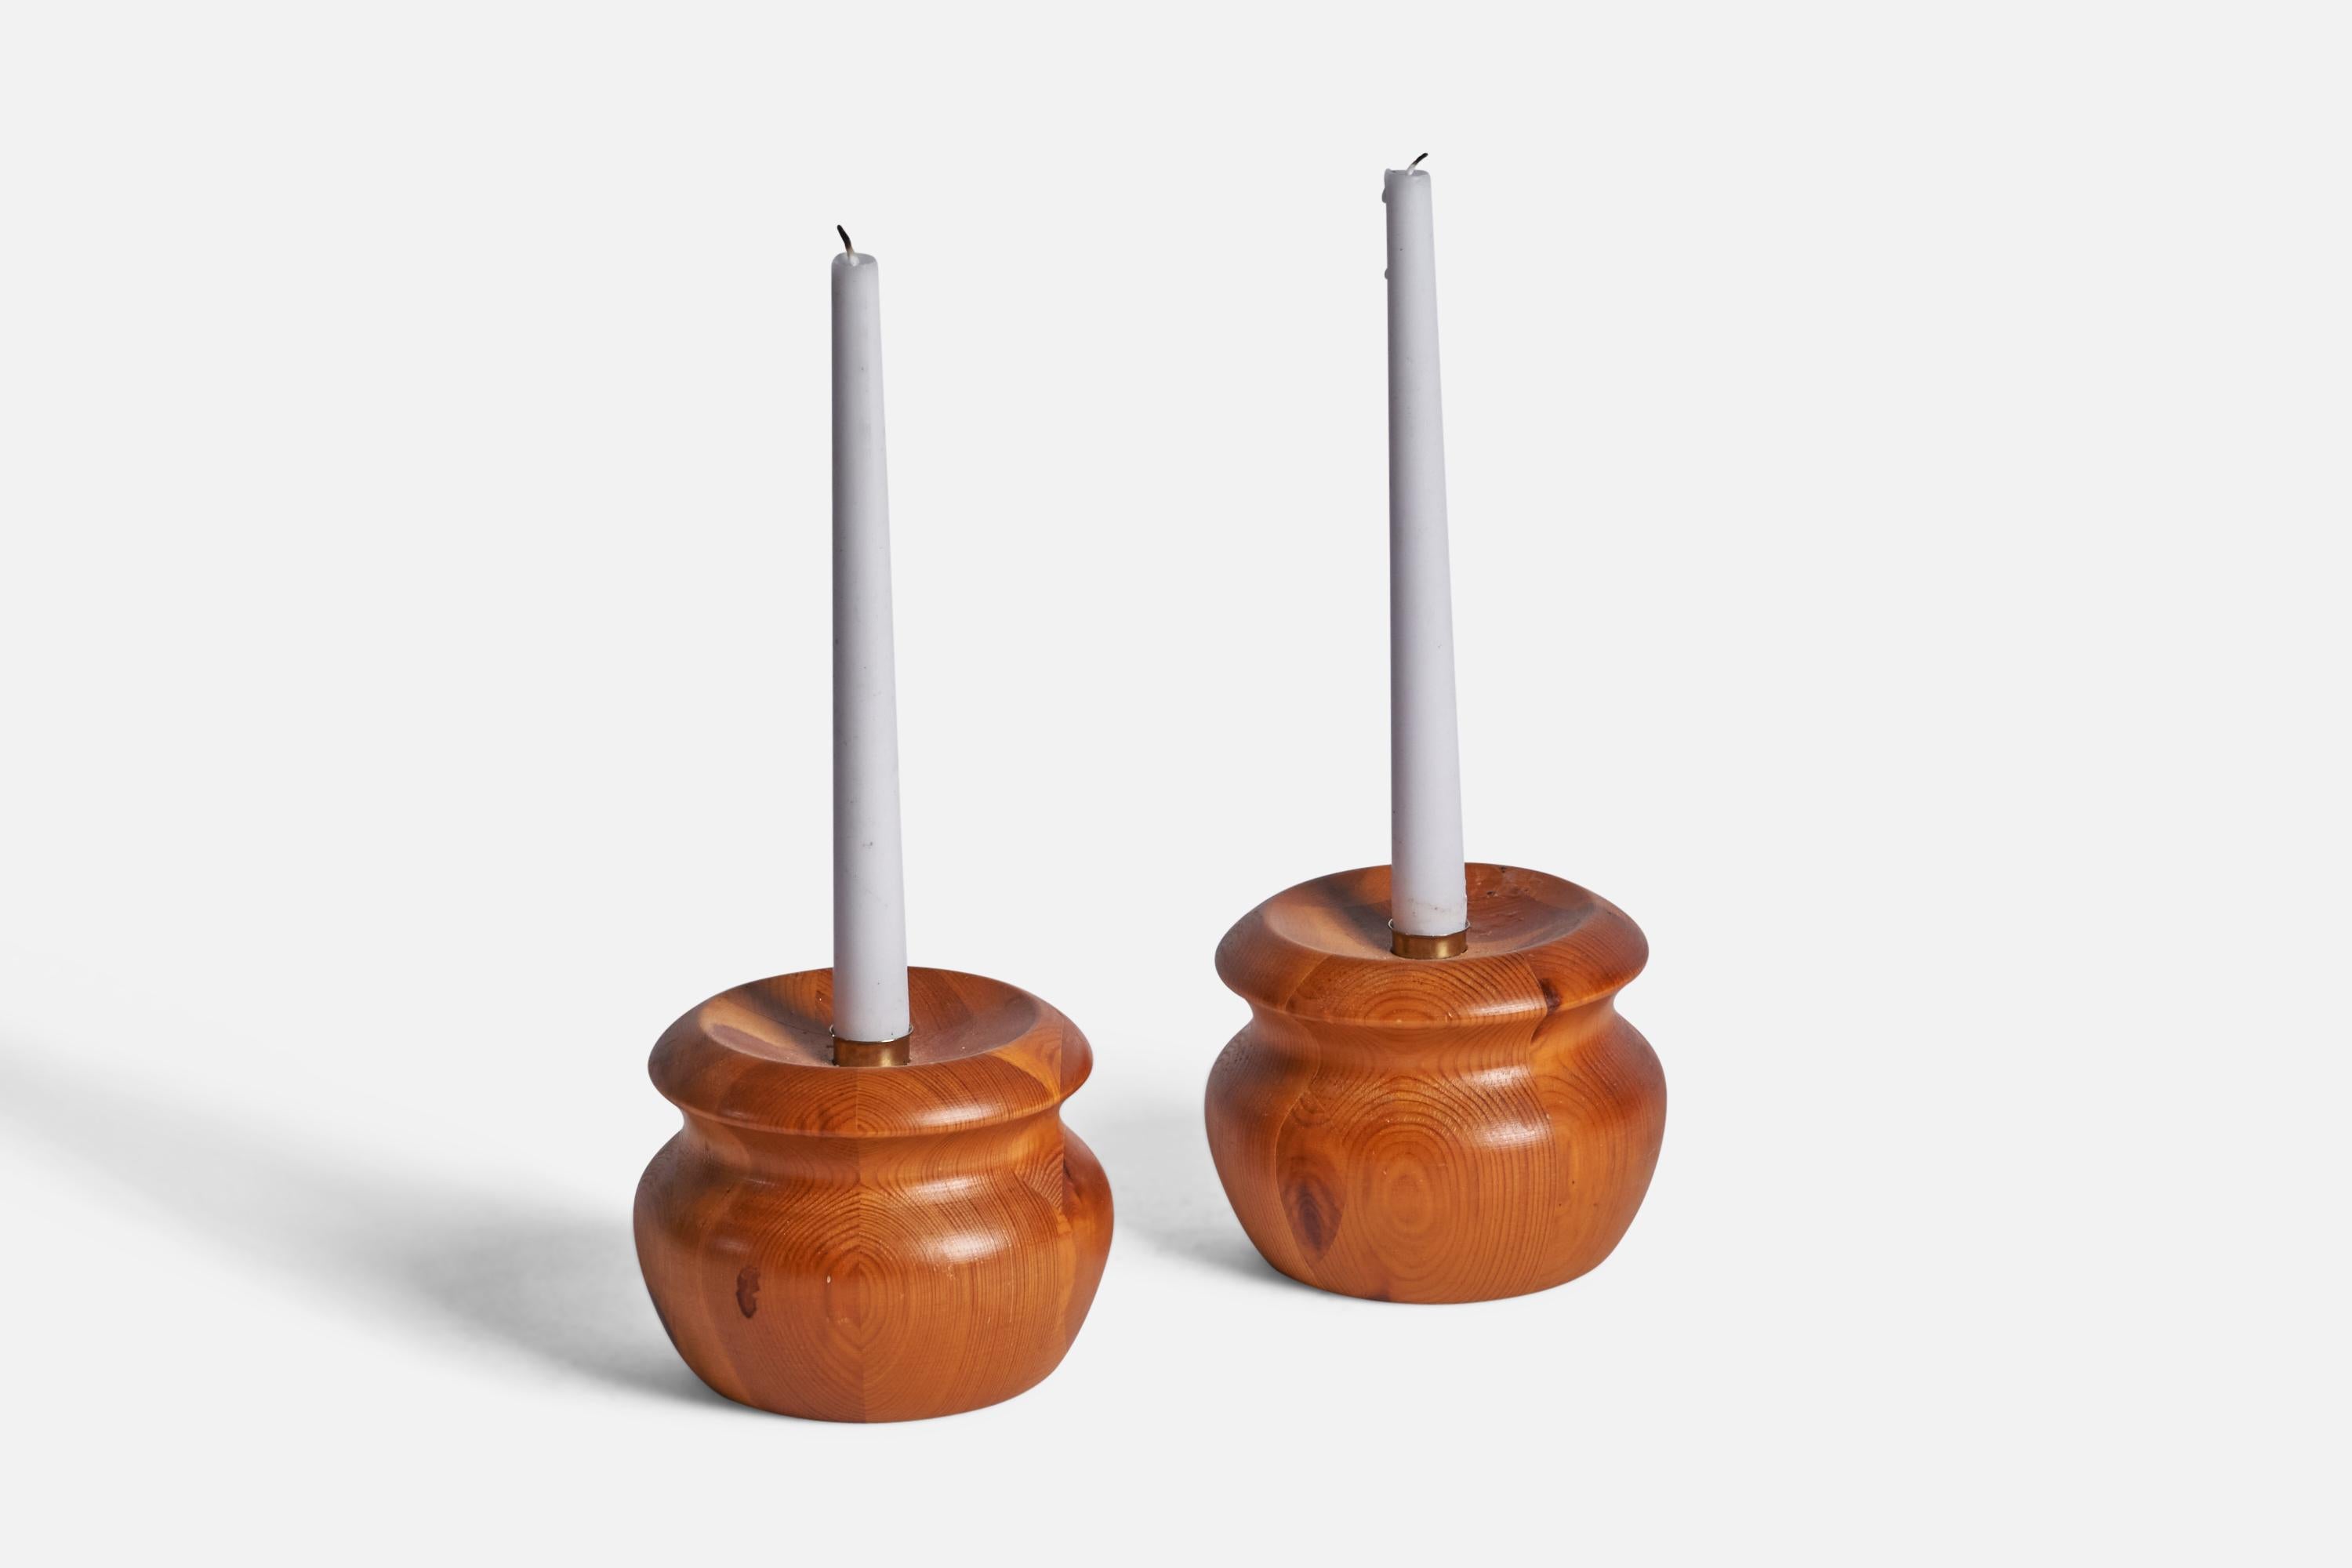 A pair of pine and brass candlesticks designed and produced in Sweden, 1970s.
Holds 0.75” candles